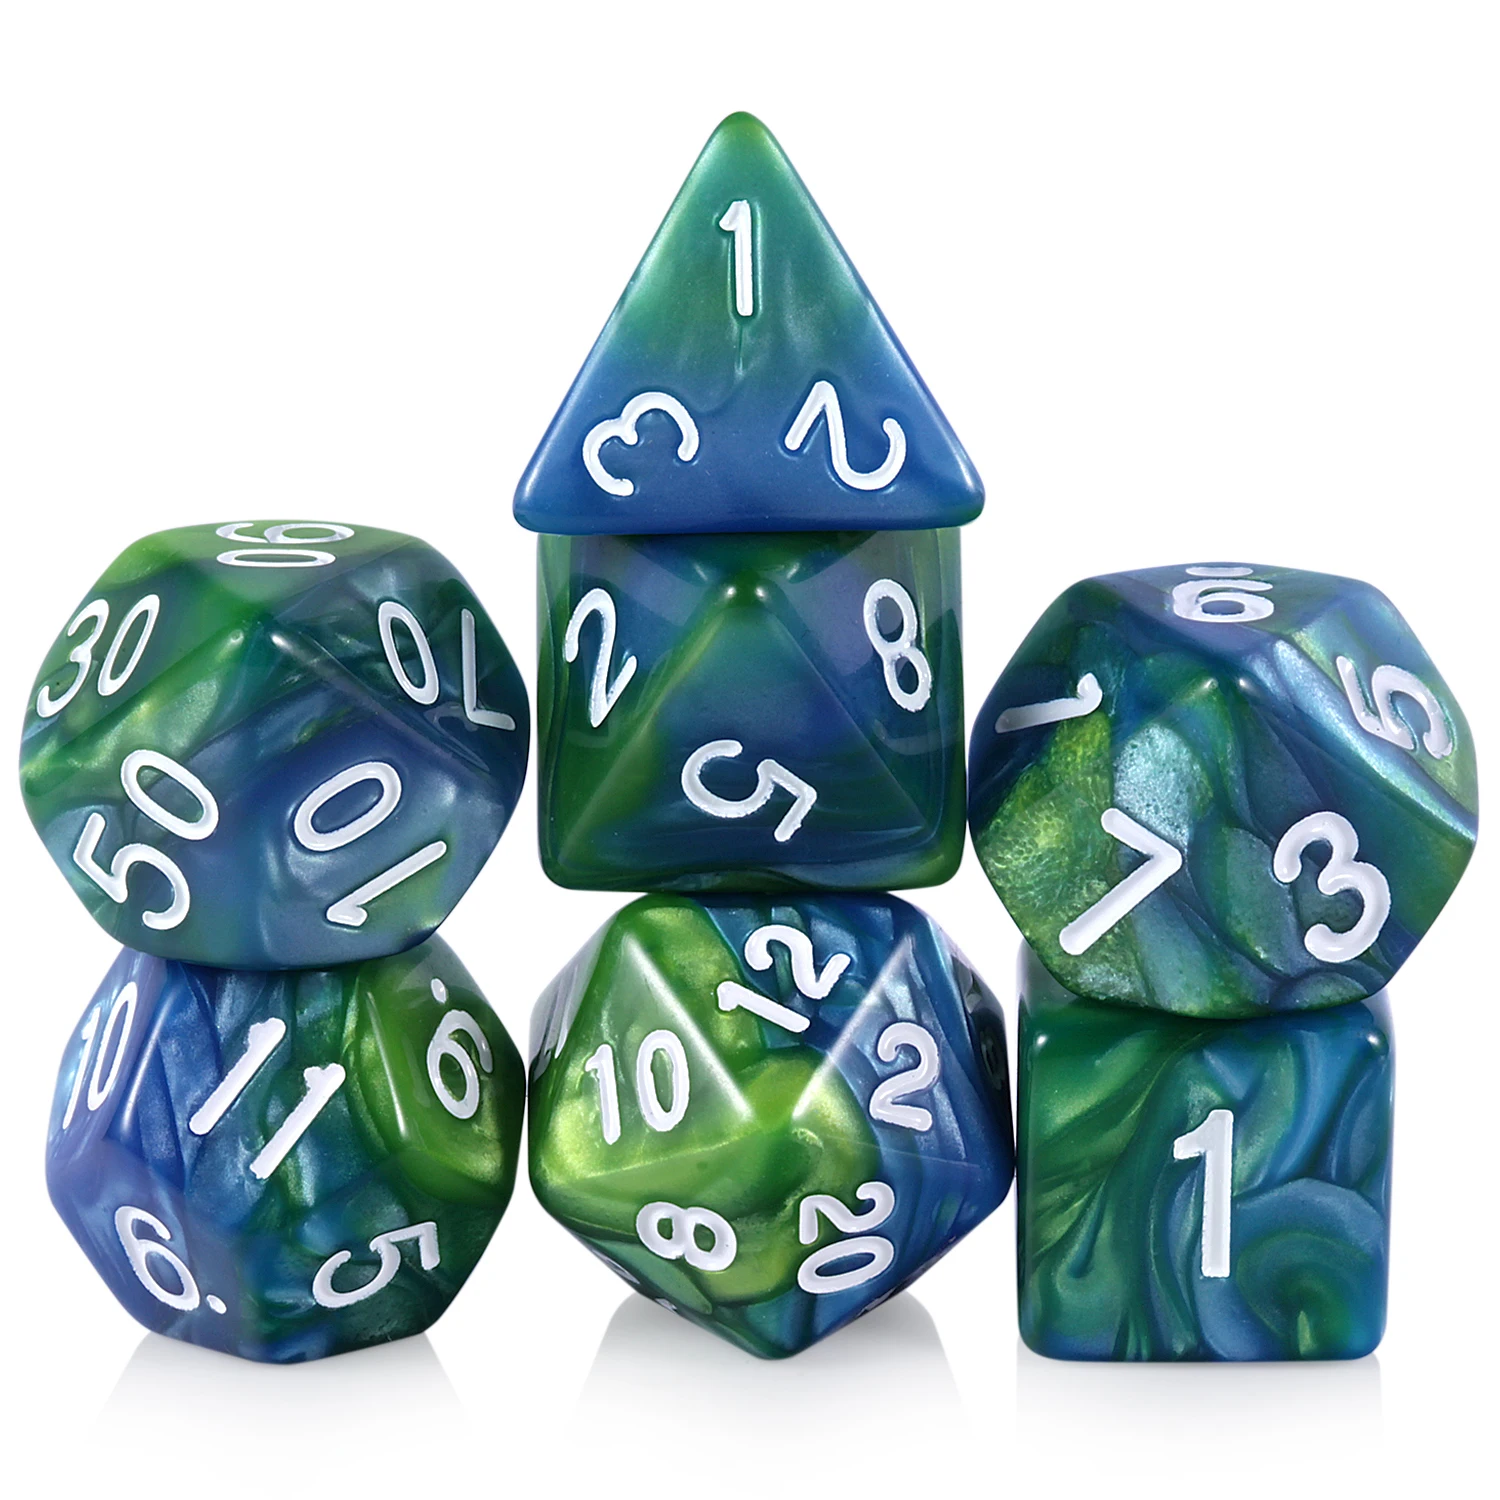 

Custom RPG Dice Set Factory wholesale 7 dies Acrylic polyhedral dnd Dice for Dungeons and Dragons DnD Table Games